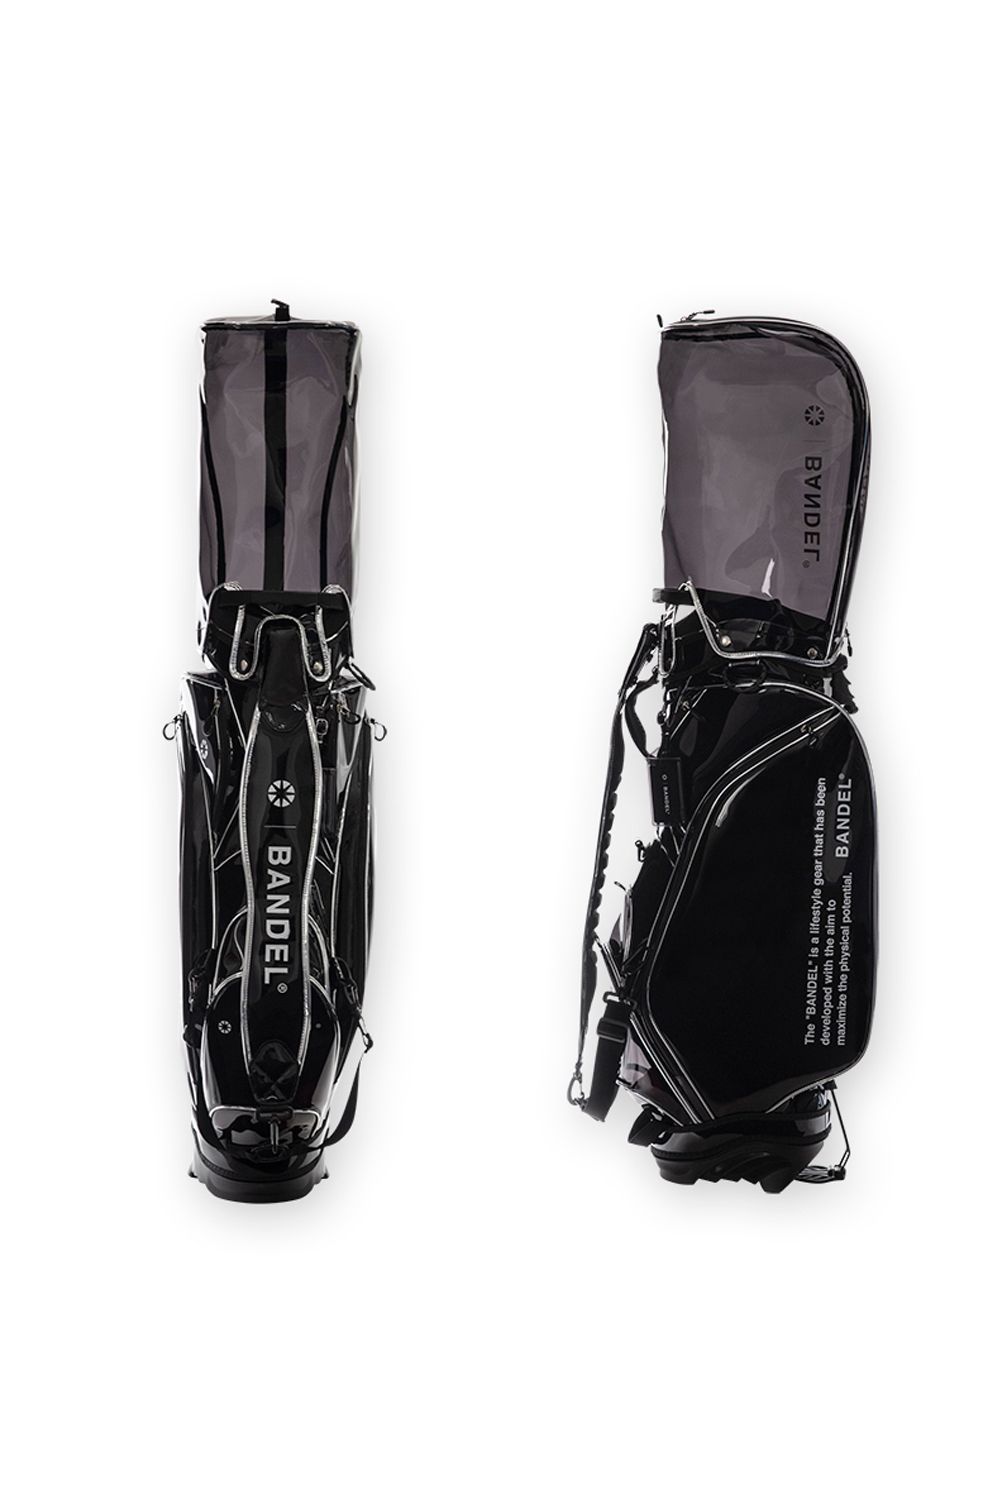 BANDEL - Clear Tour Caddy Bag / クリア ツアー キャディ バッグ